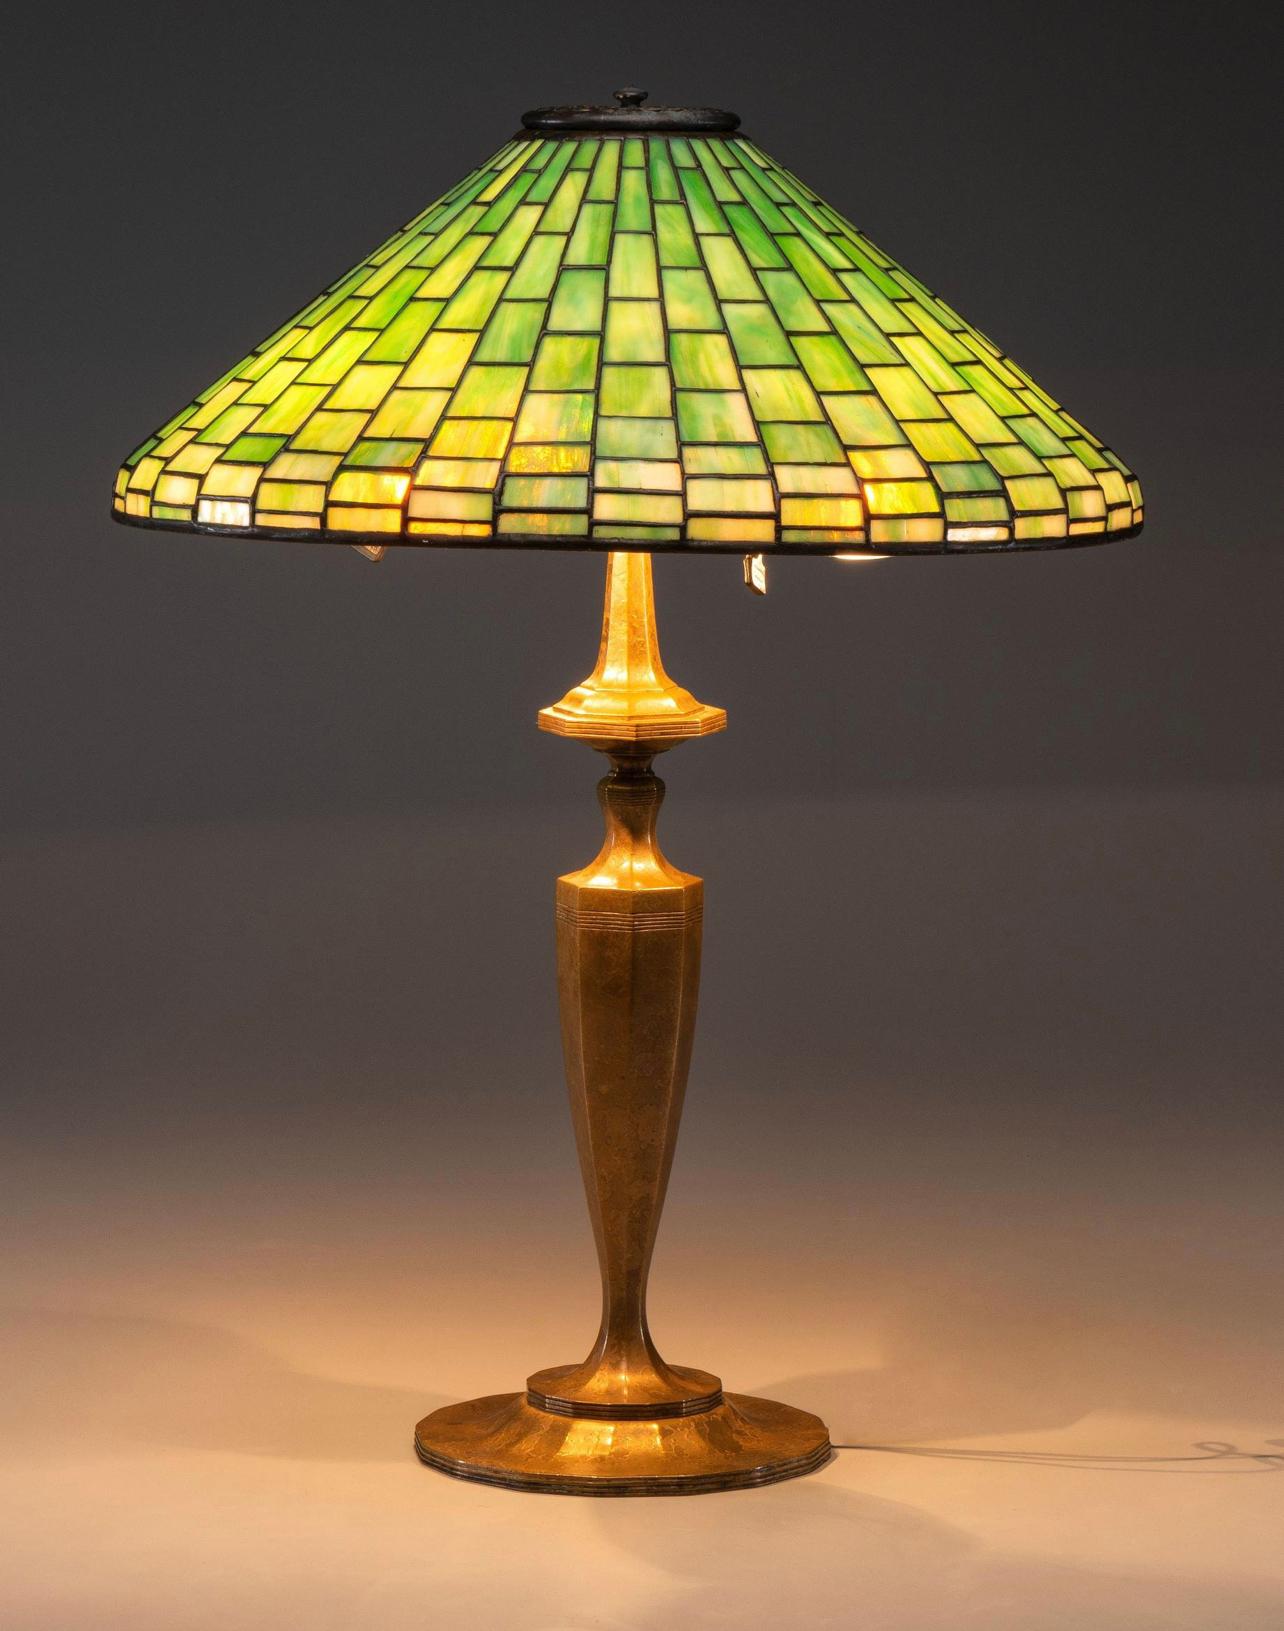 Tiffany Studios leaded glass and gilt bronze table lamp. A rare and large 18 Inch diameter green leaded glass plain square cone shade with geometric design sits on a 24 Inch high gilt bronze Art Deco classical distinguished table lamp base.